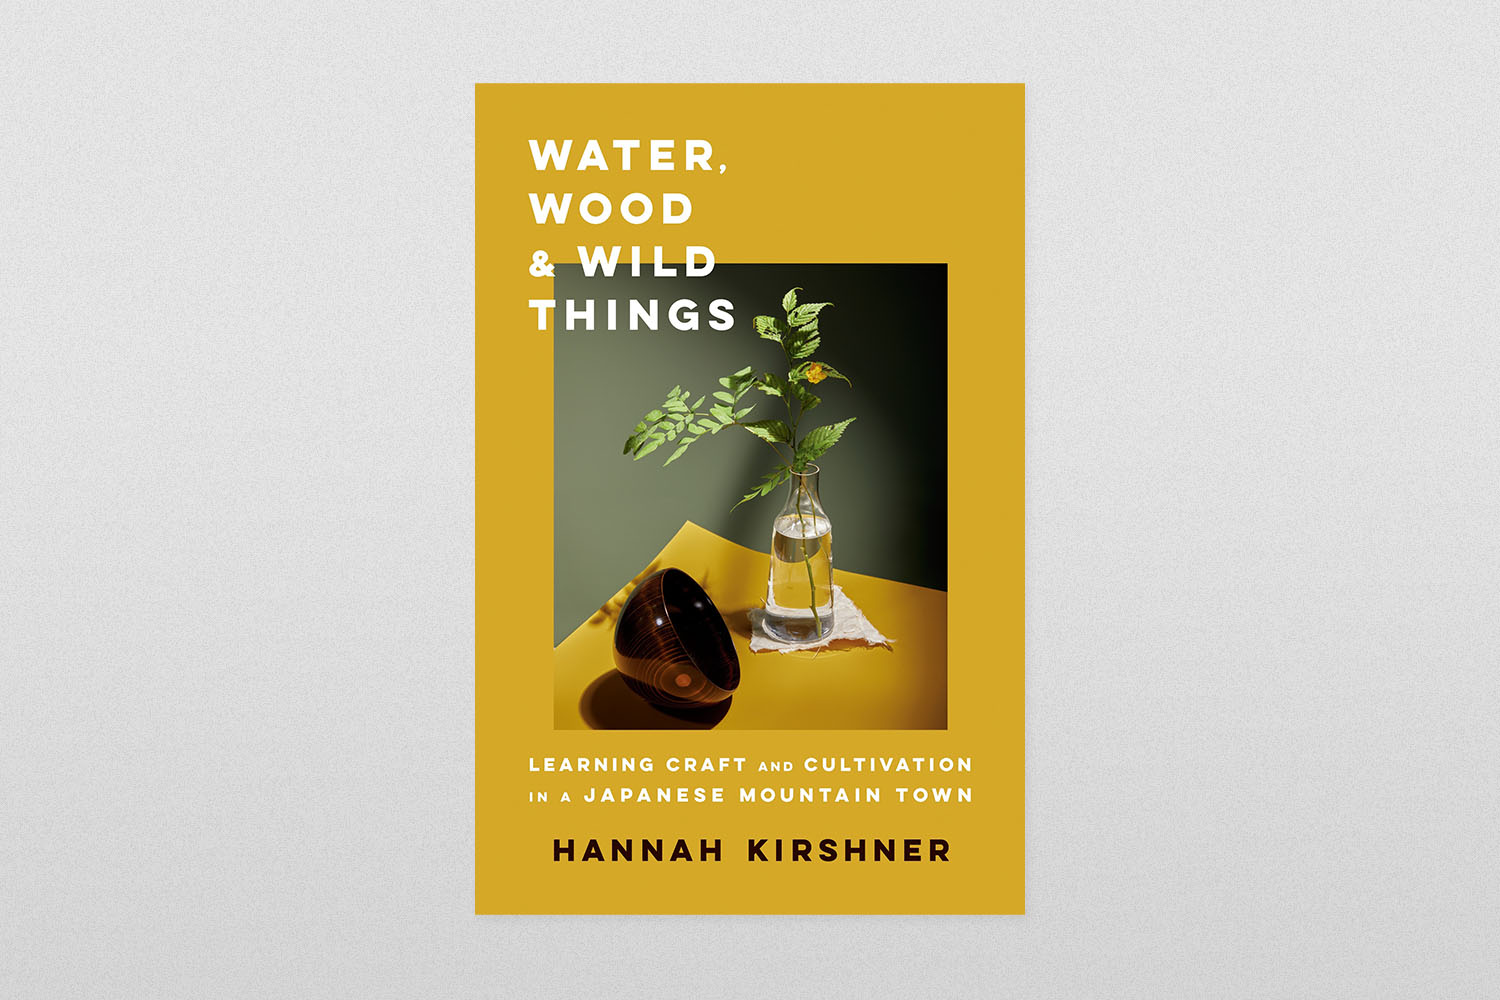 "Water, Wood, and Wild Things"